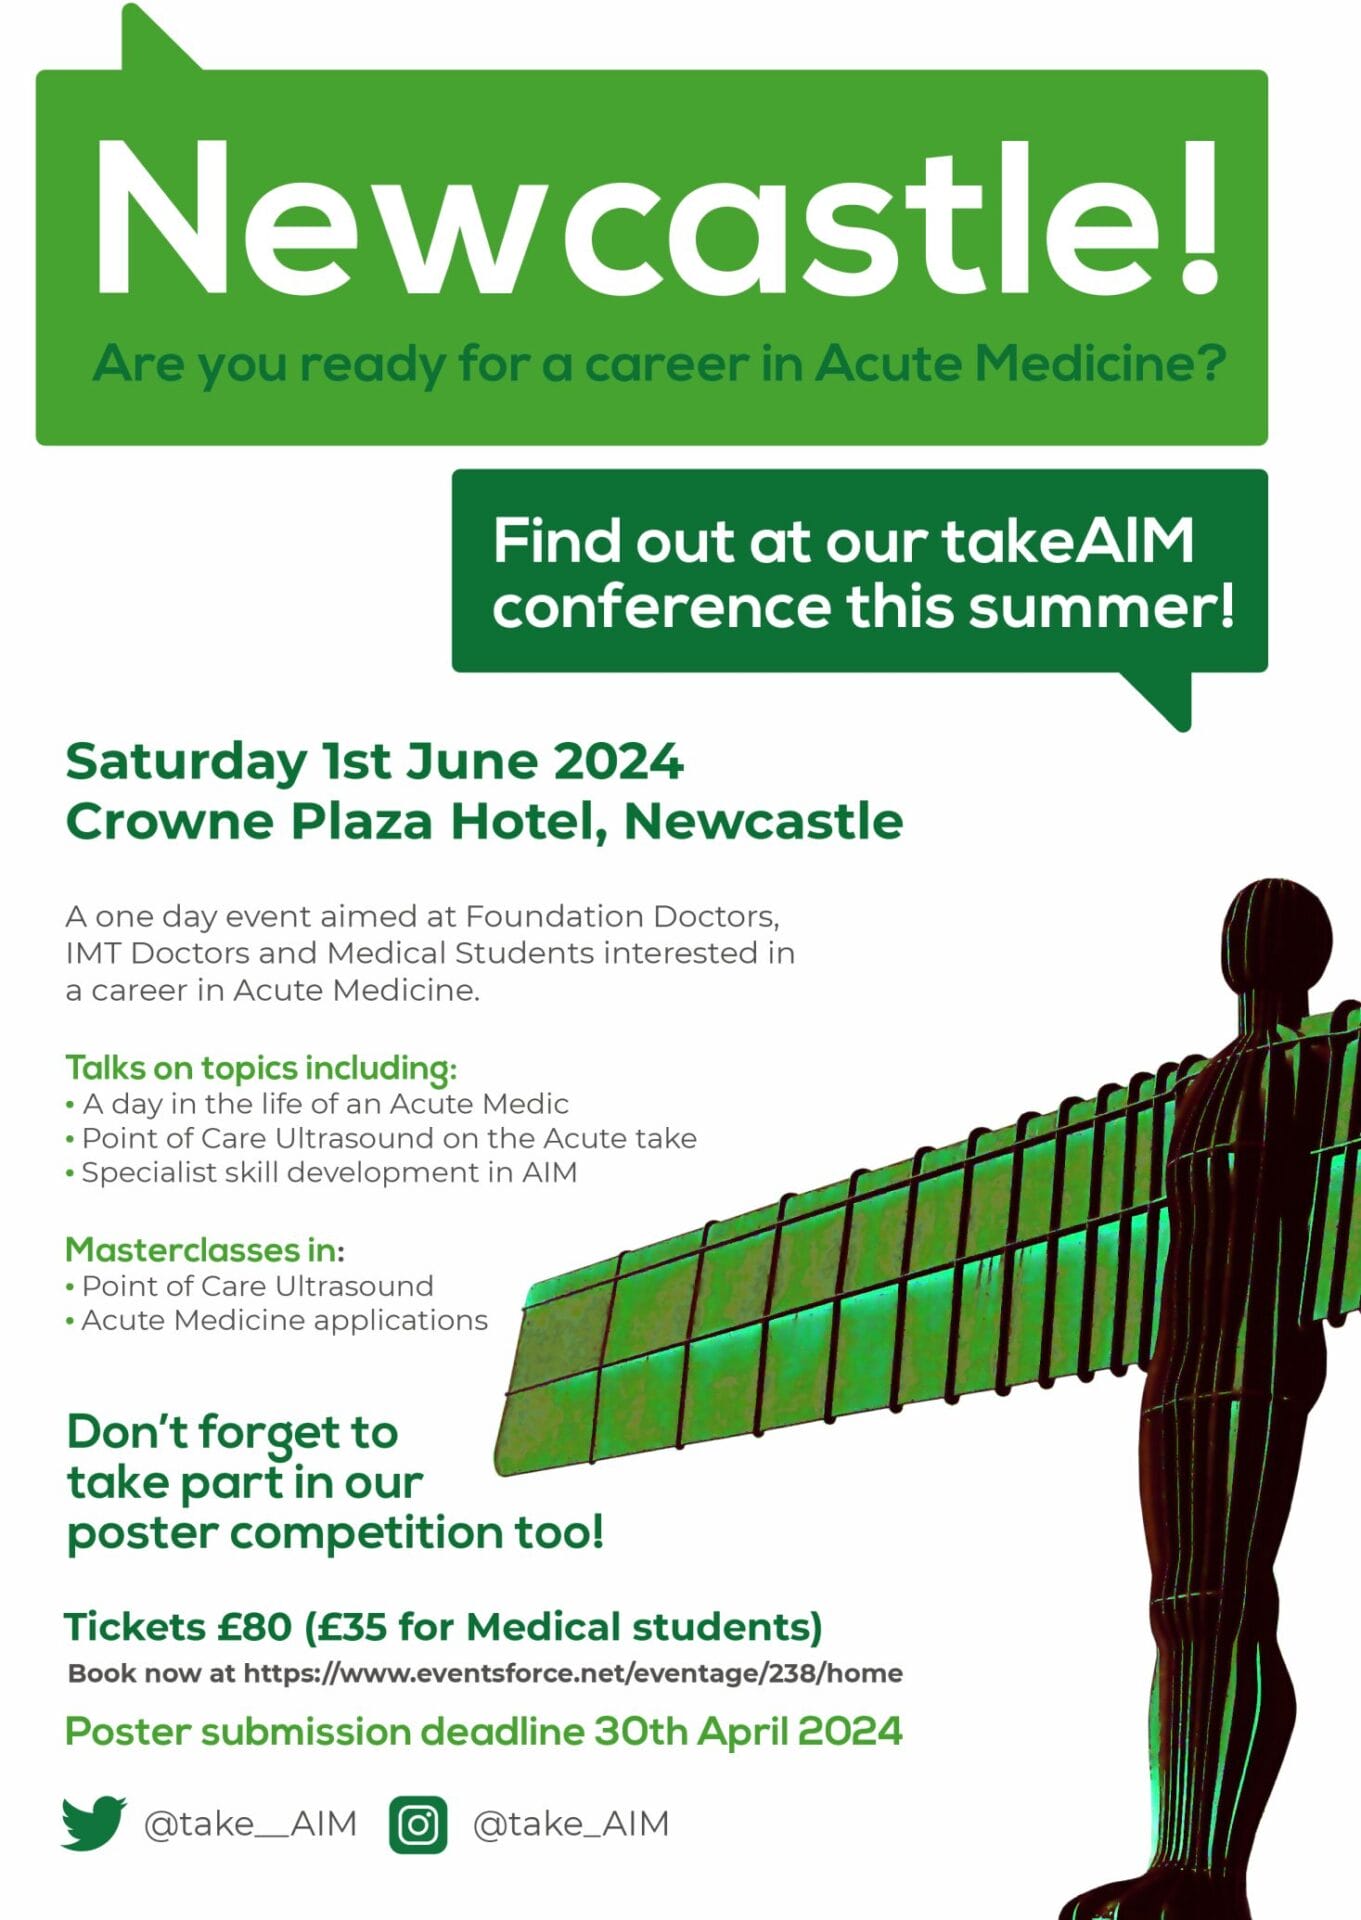 Newcastle_Poster_2024_v002[1]green angel version_small